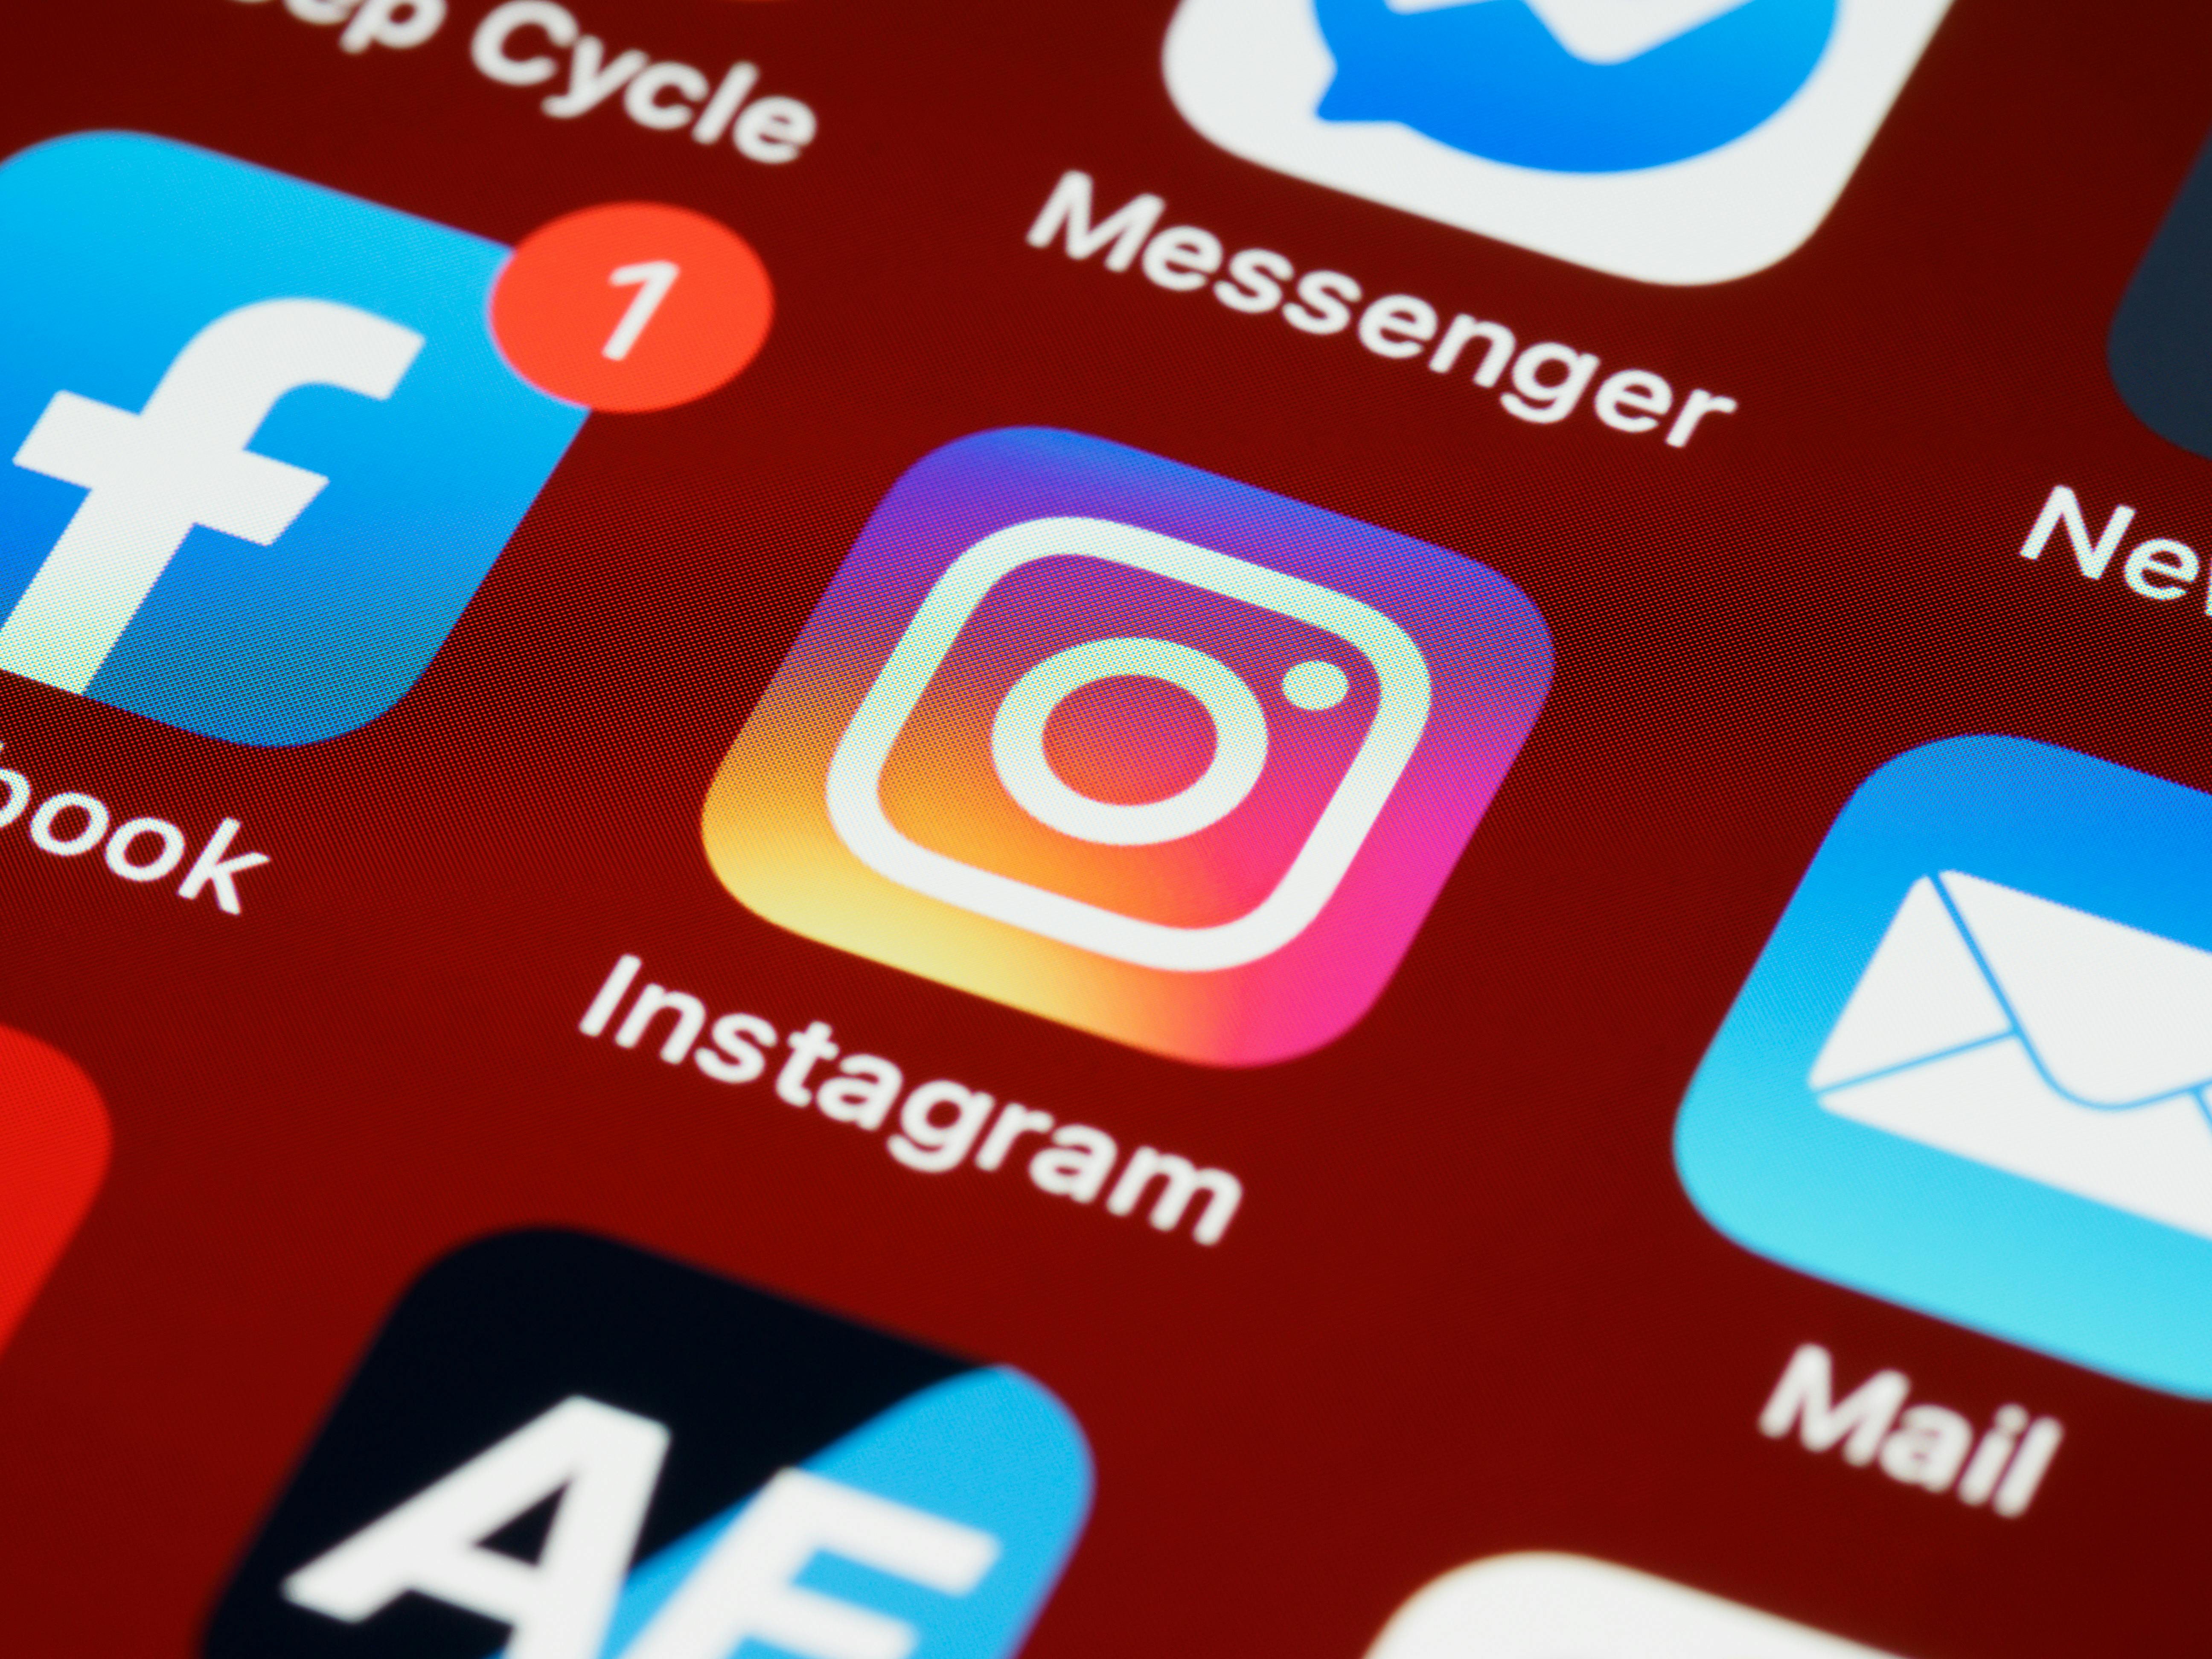 A phone screen showing the Instagram icon | Source: Pexels